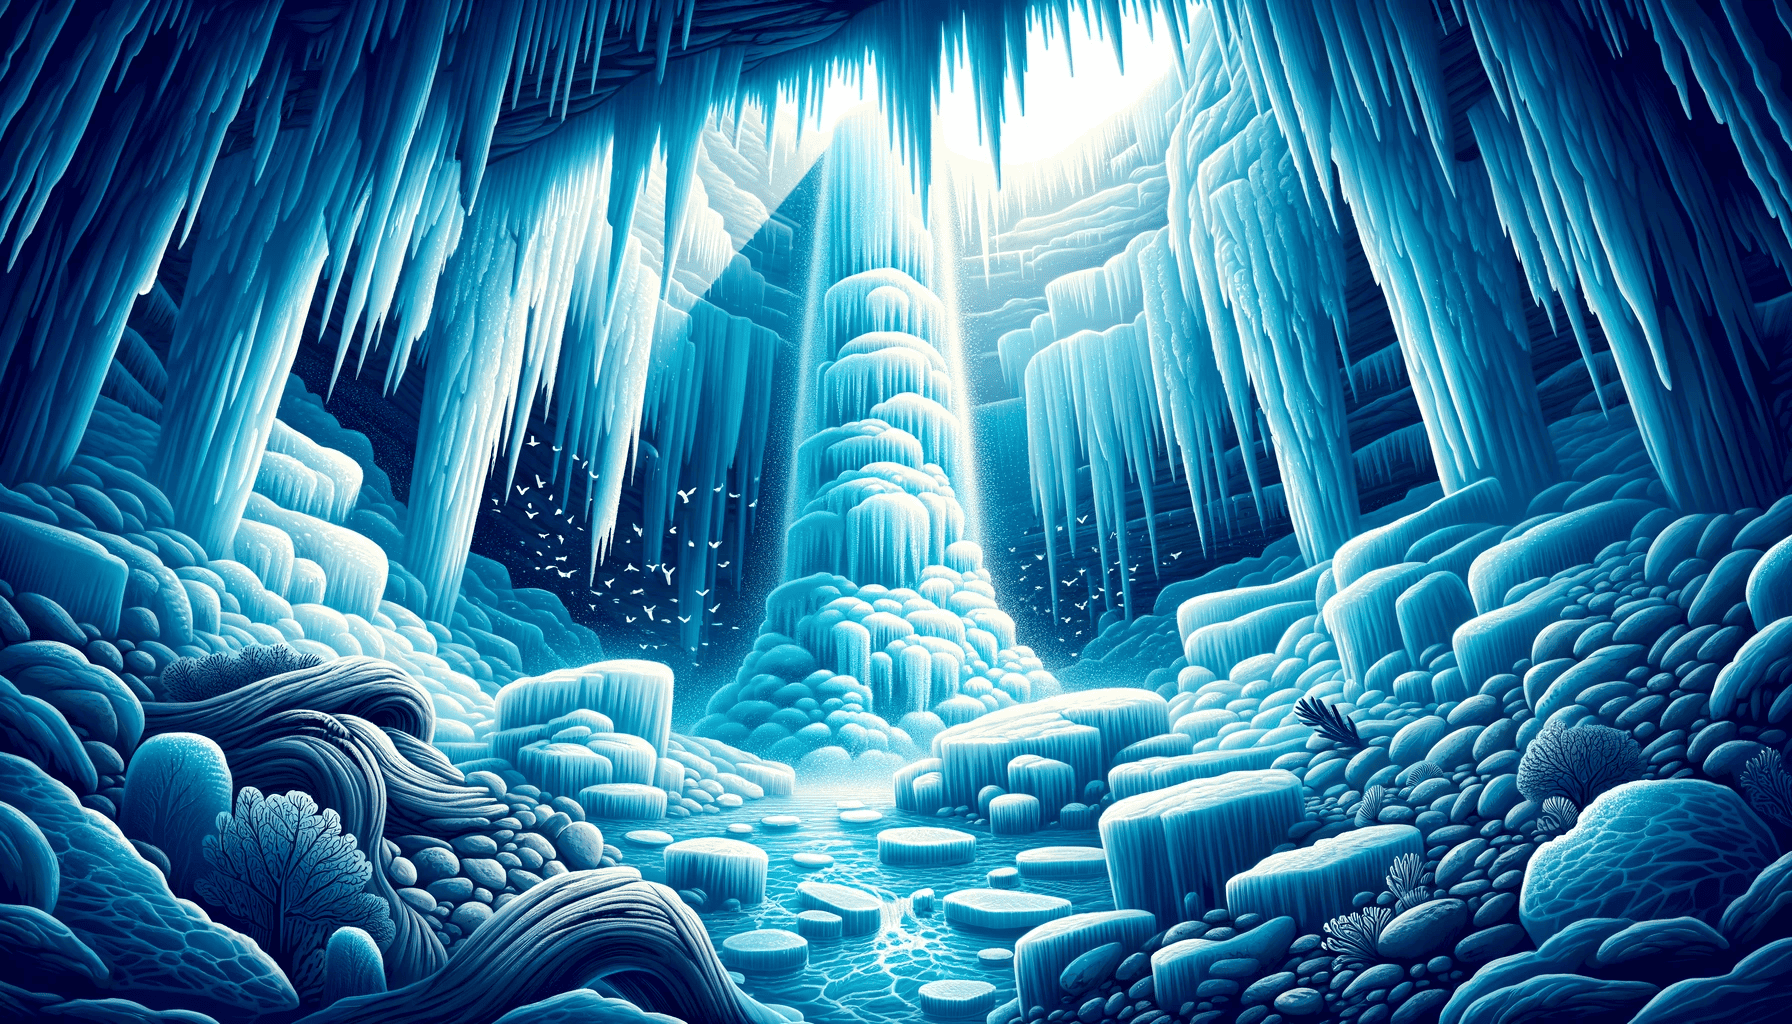 Vector illustration of a frozen waterfall hidden beneath Antarctica's ice. As the sunlight filters through the ice above, it casts a mesmerizing blue hue on the cascading water, surrounded by ancient plant fossils trapped in the ice.

